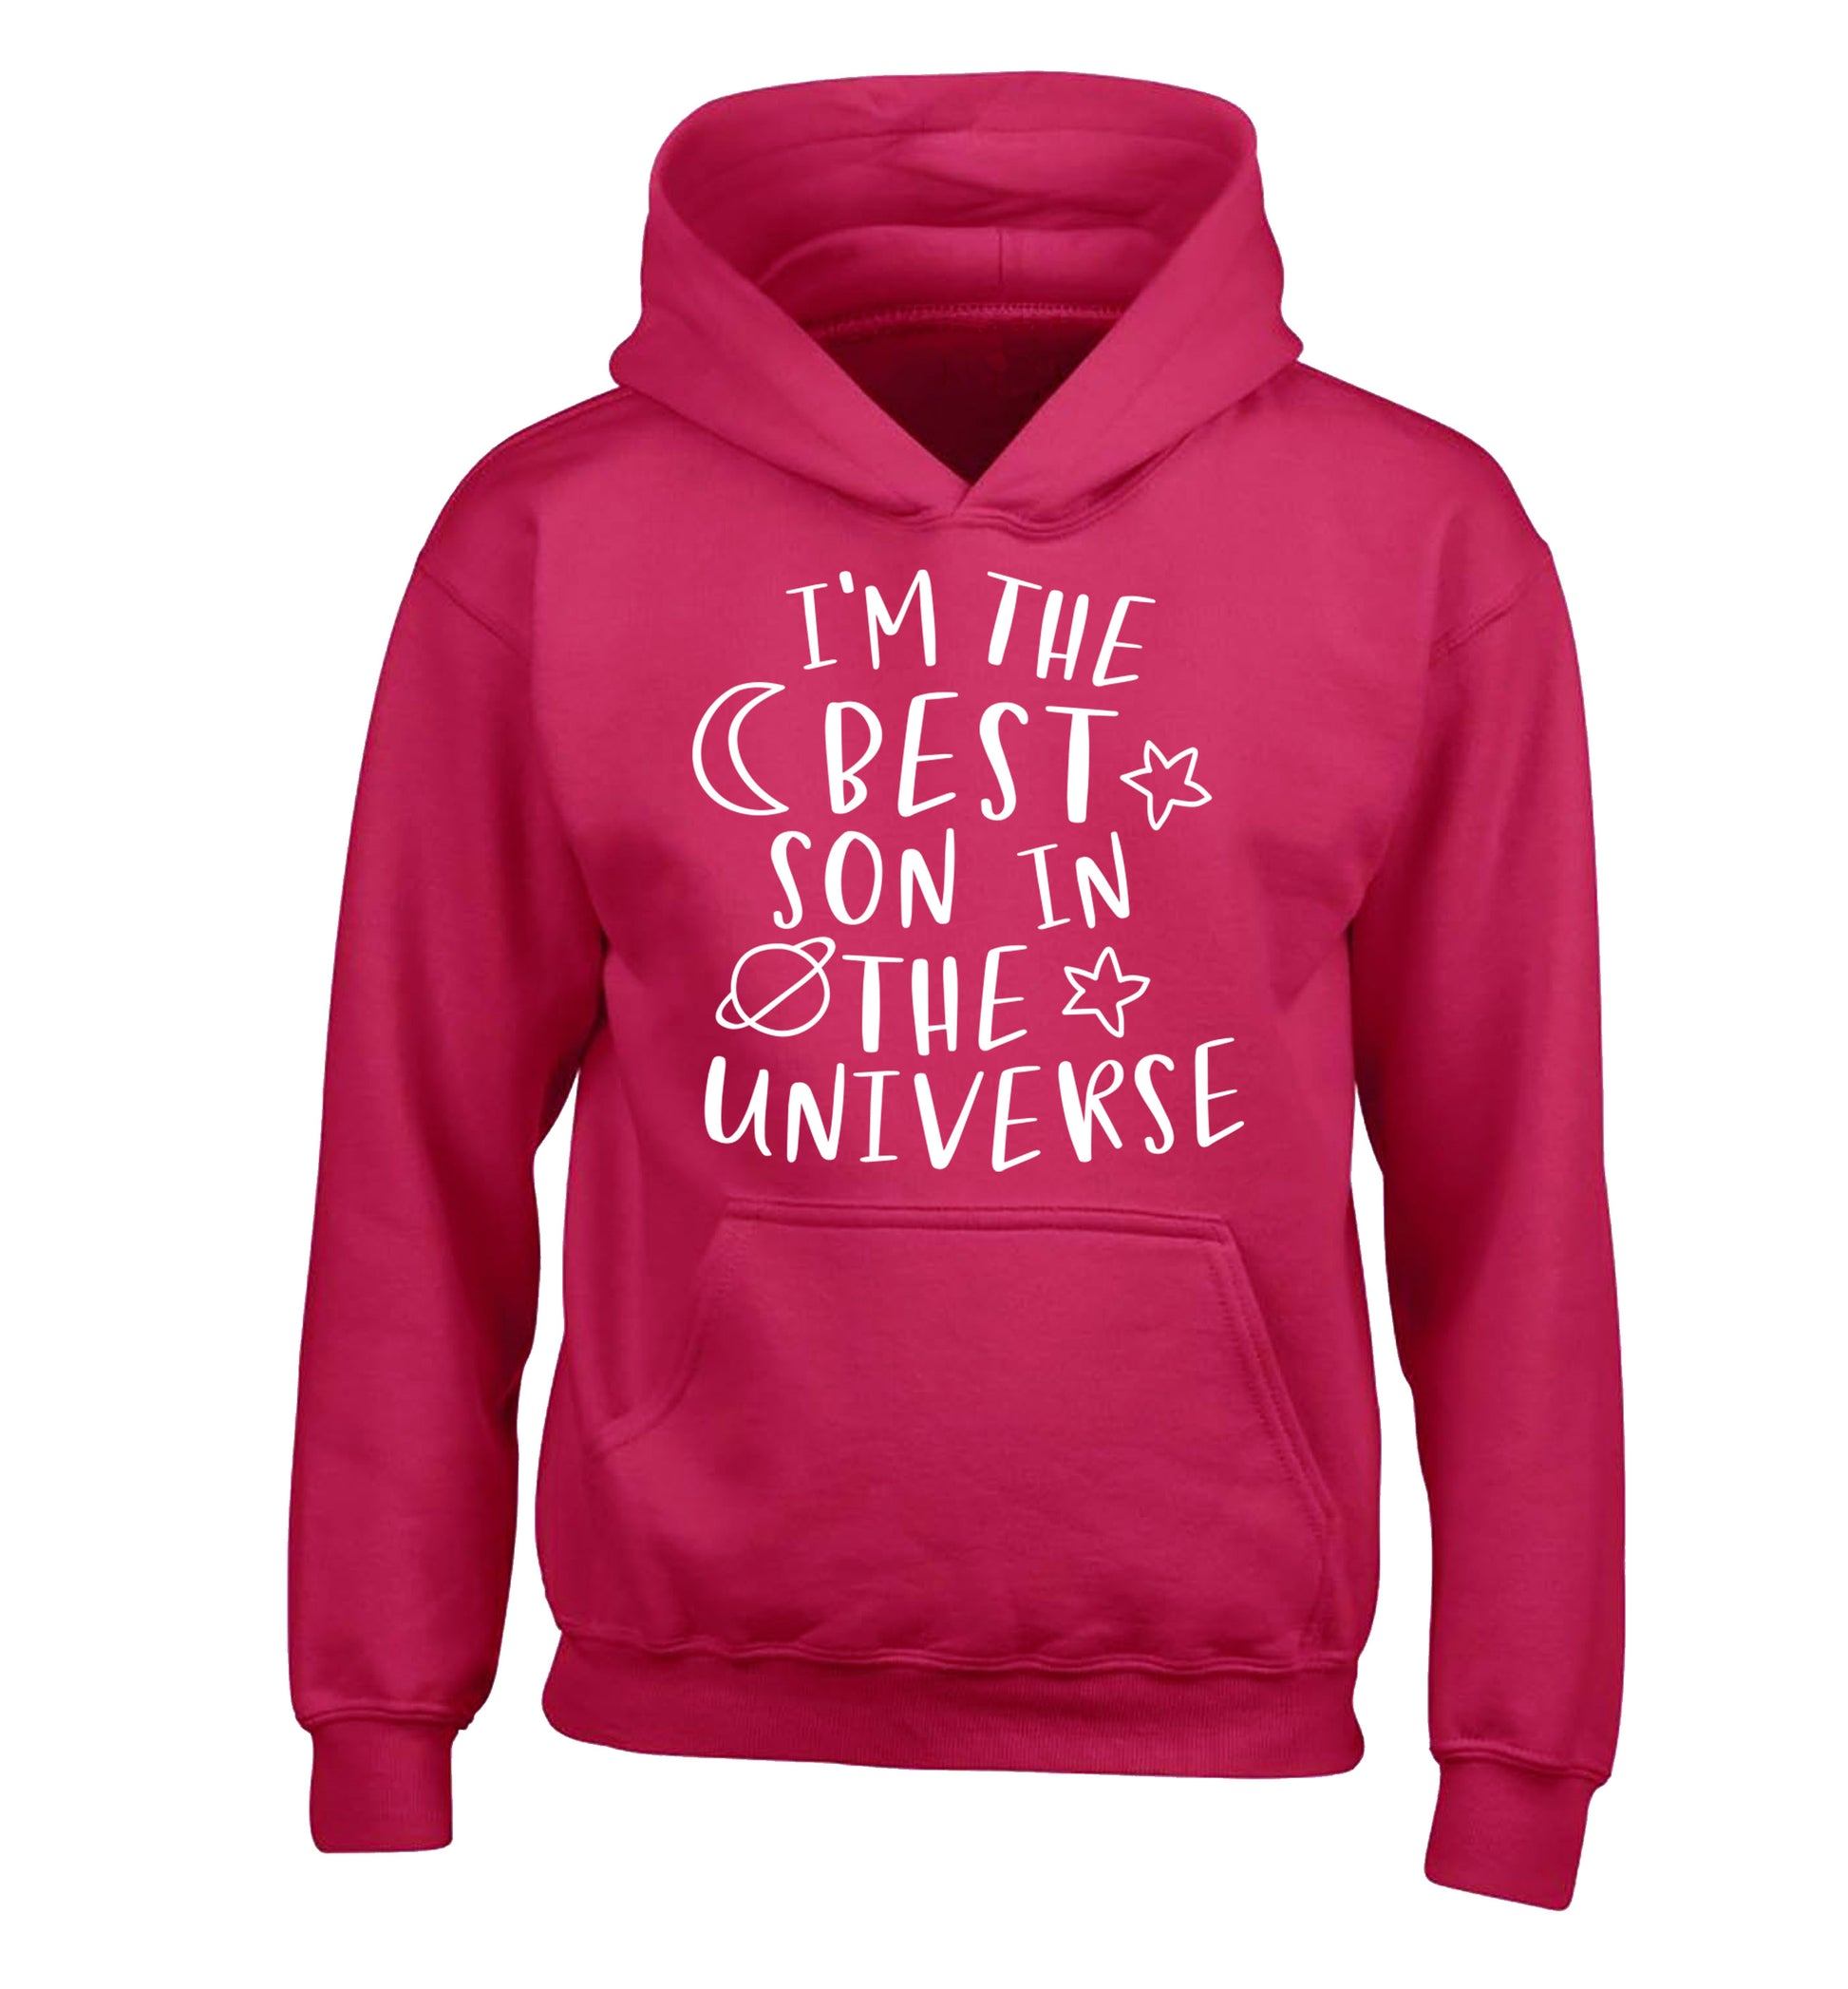 I'm the best son in the universe children's pink hoodie 12-13 Years